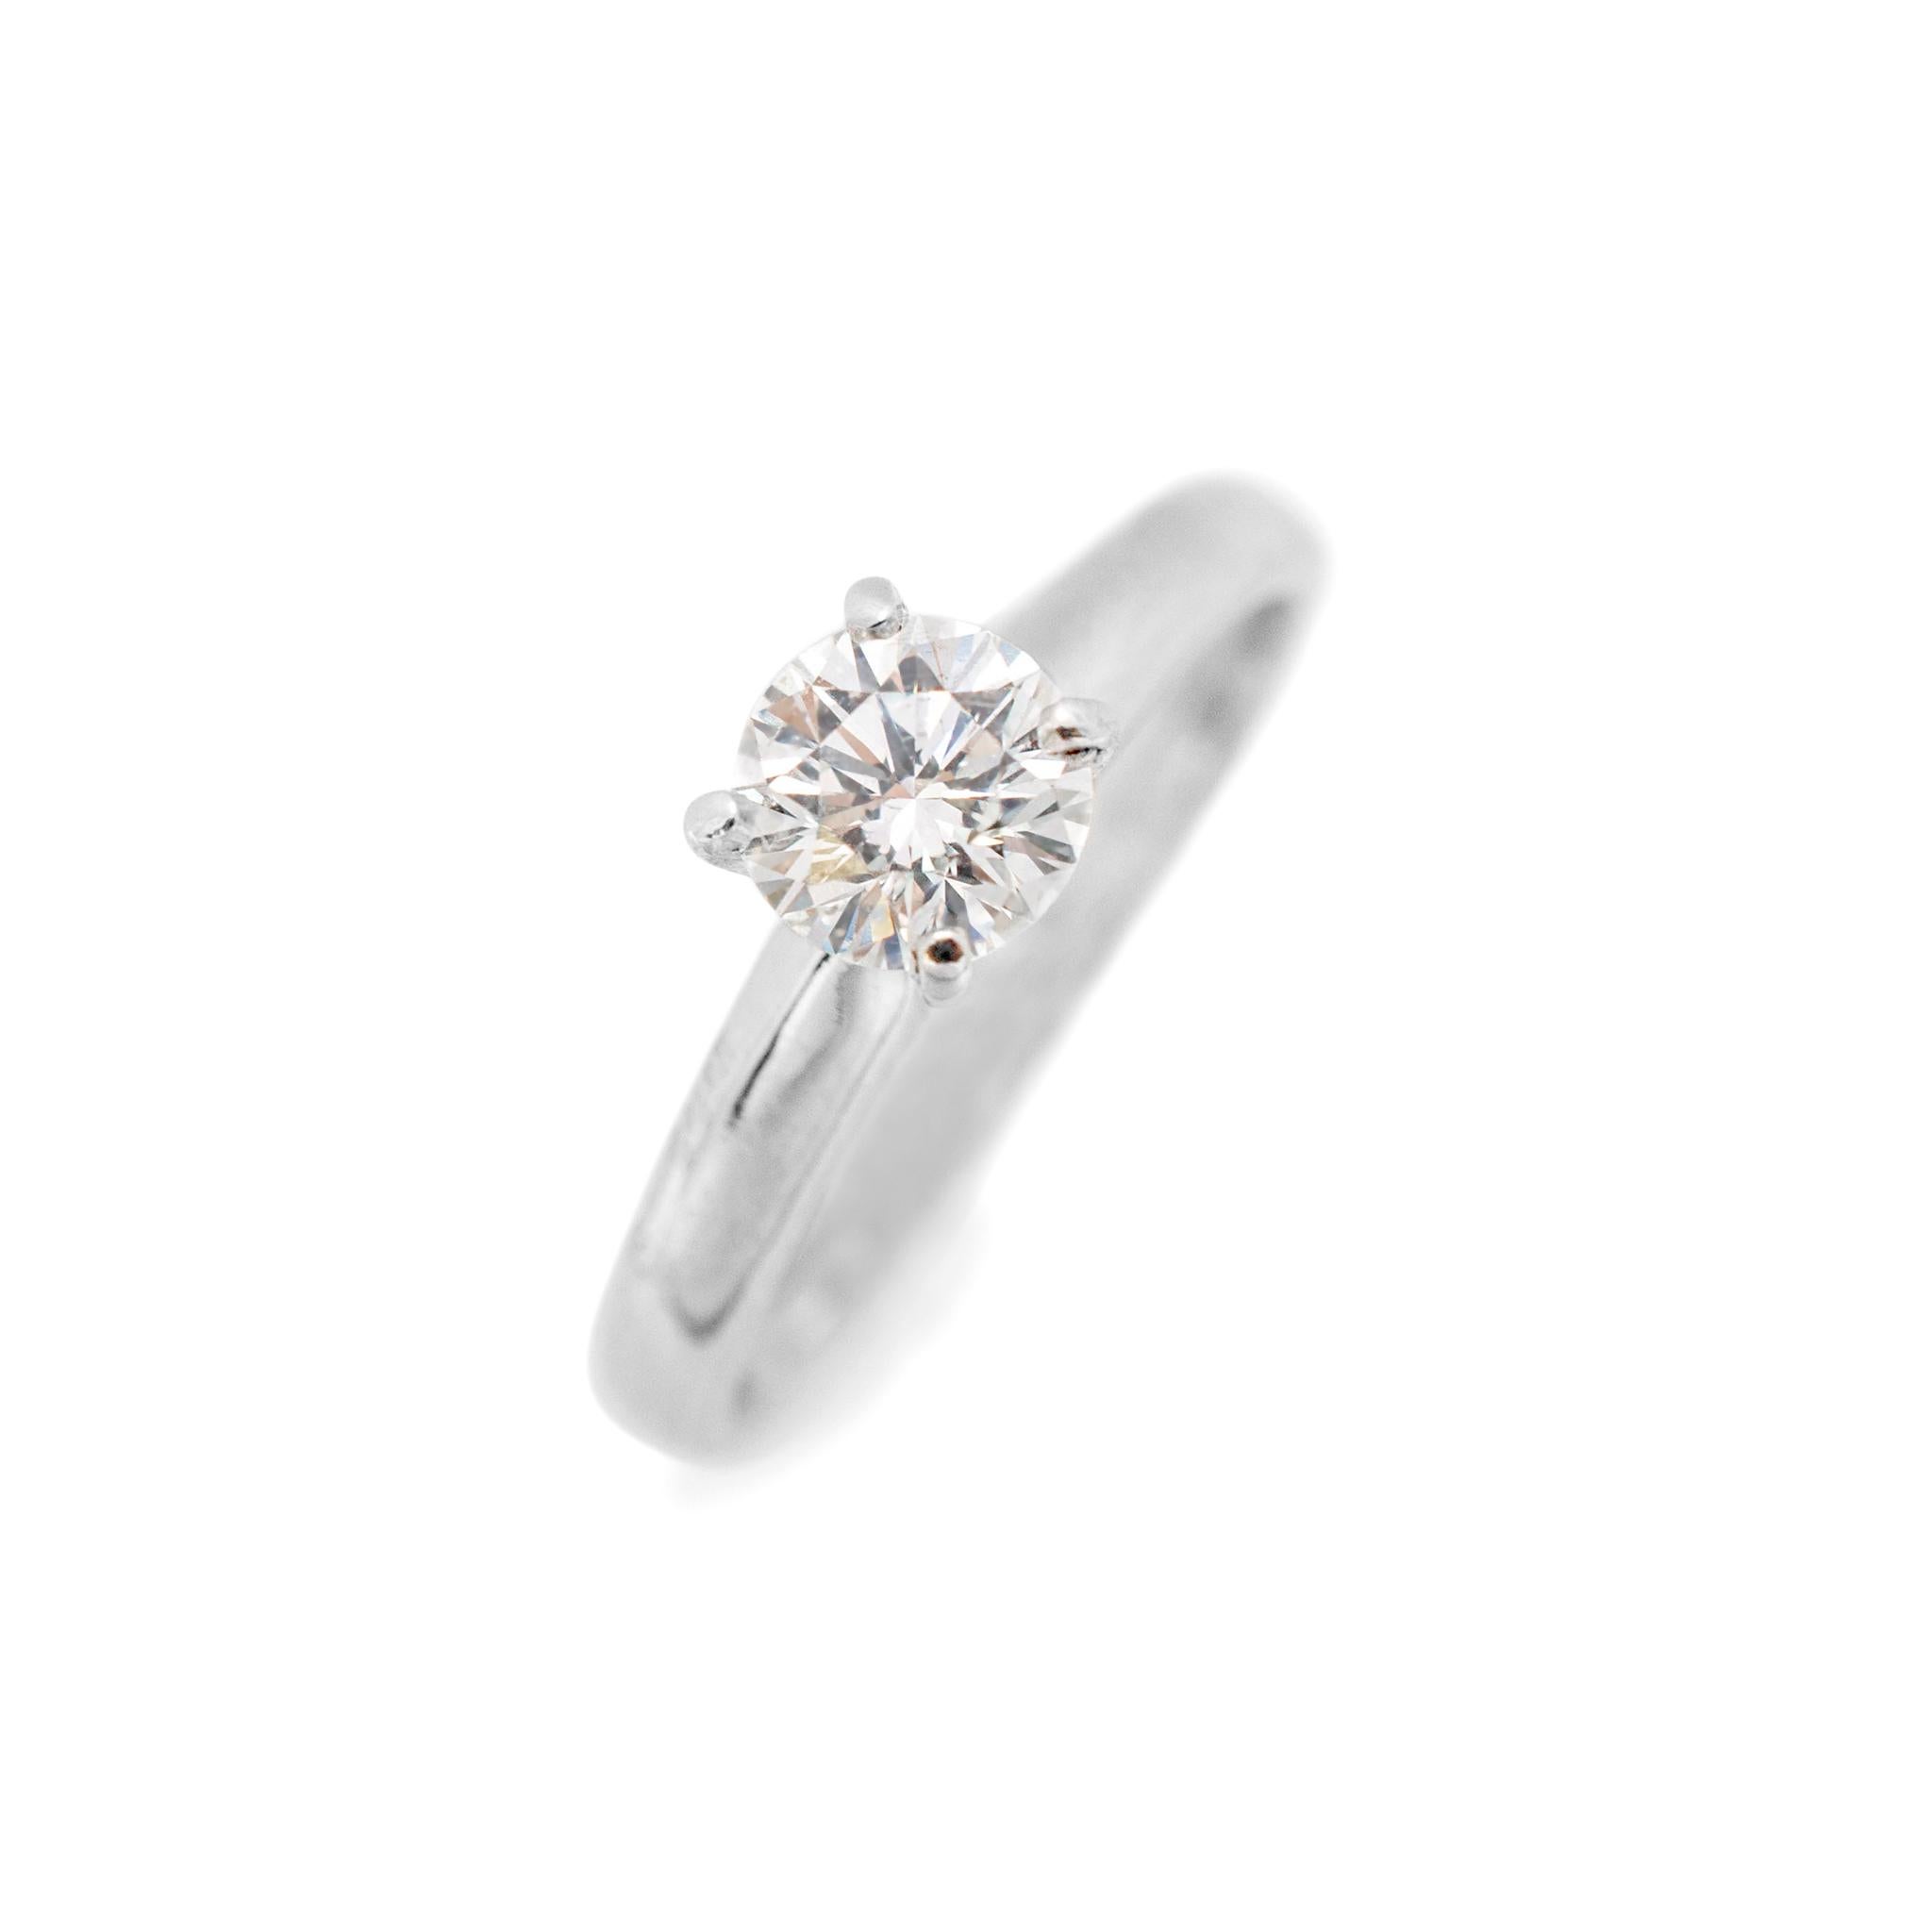 Gender: Ladies

Material: 14K White Gold

Size: 5

Shank Width: 2.70mm

Weight: 2.30 grams

Ladies 14K white gold diamond solitaire engagement ring with a half round shank. Engraved with 